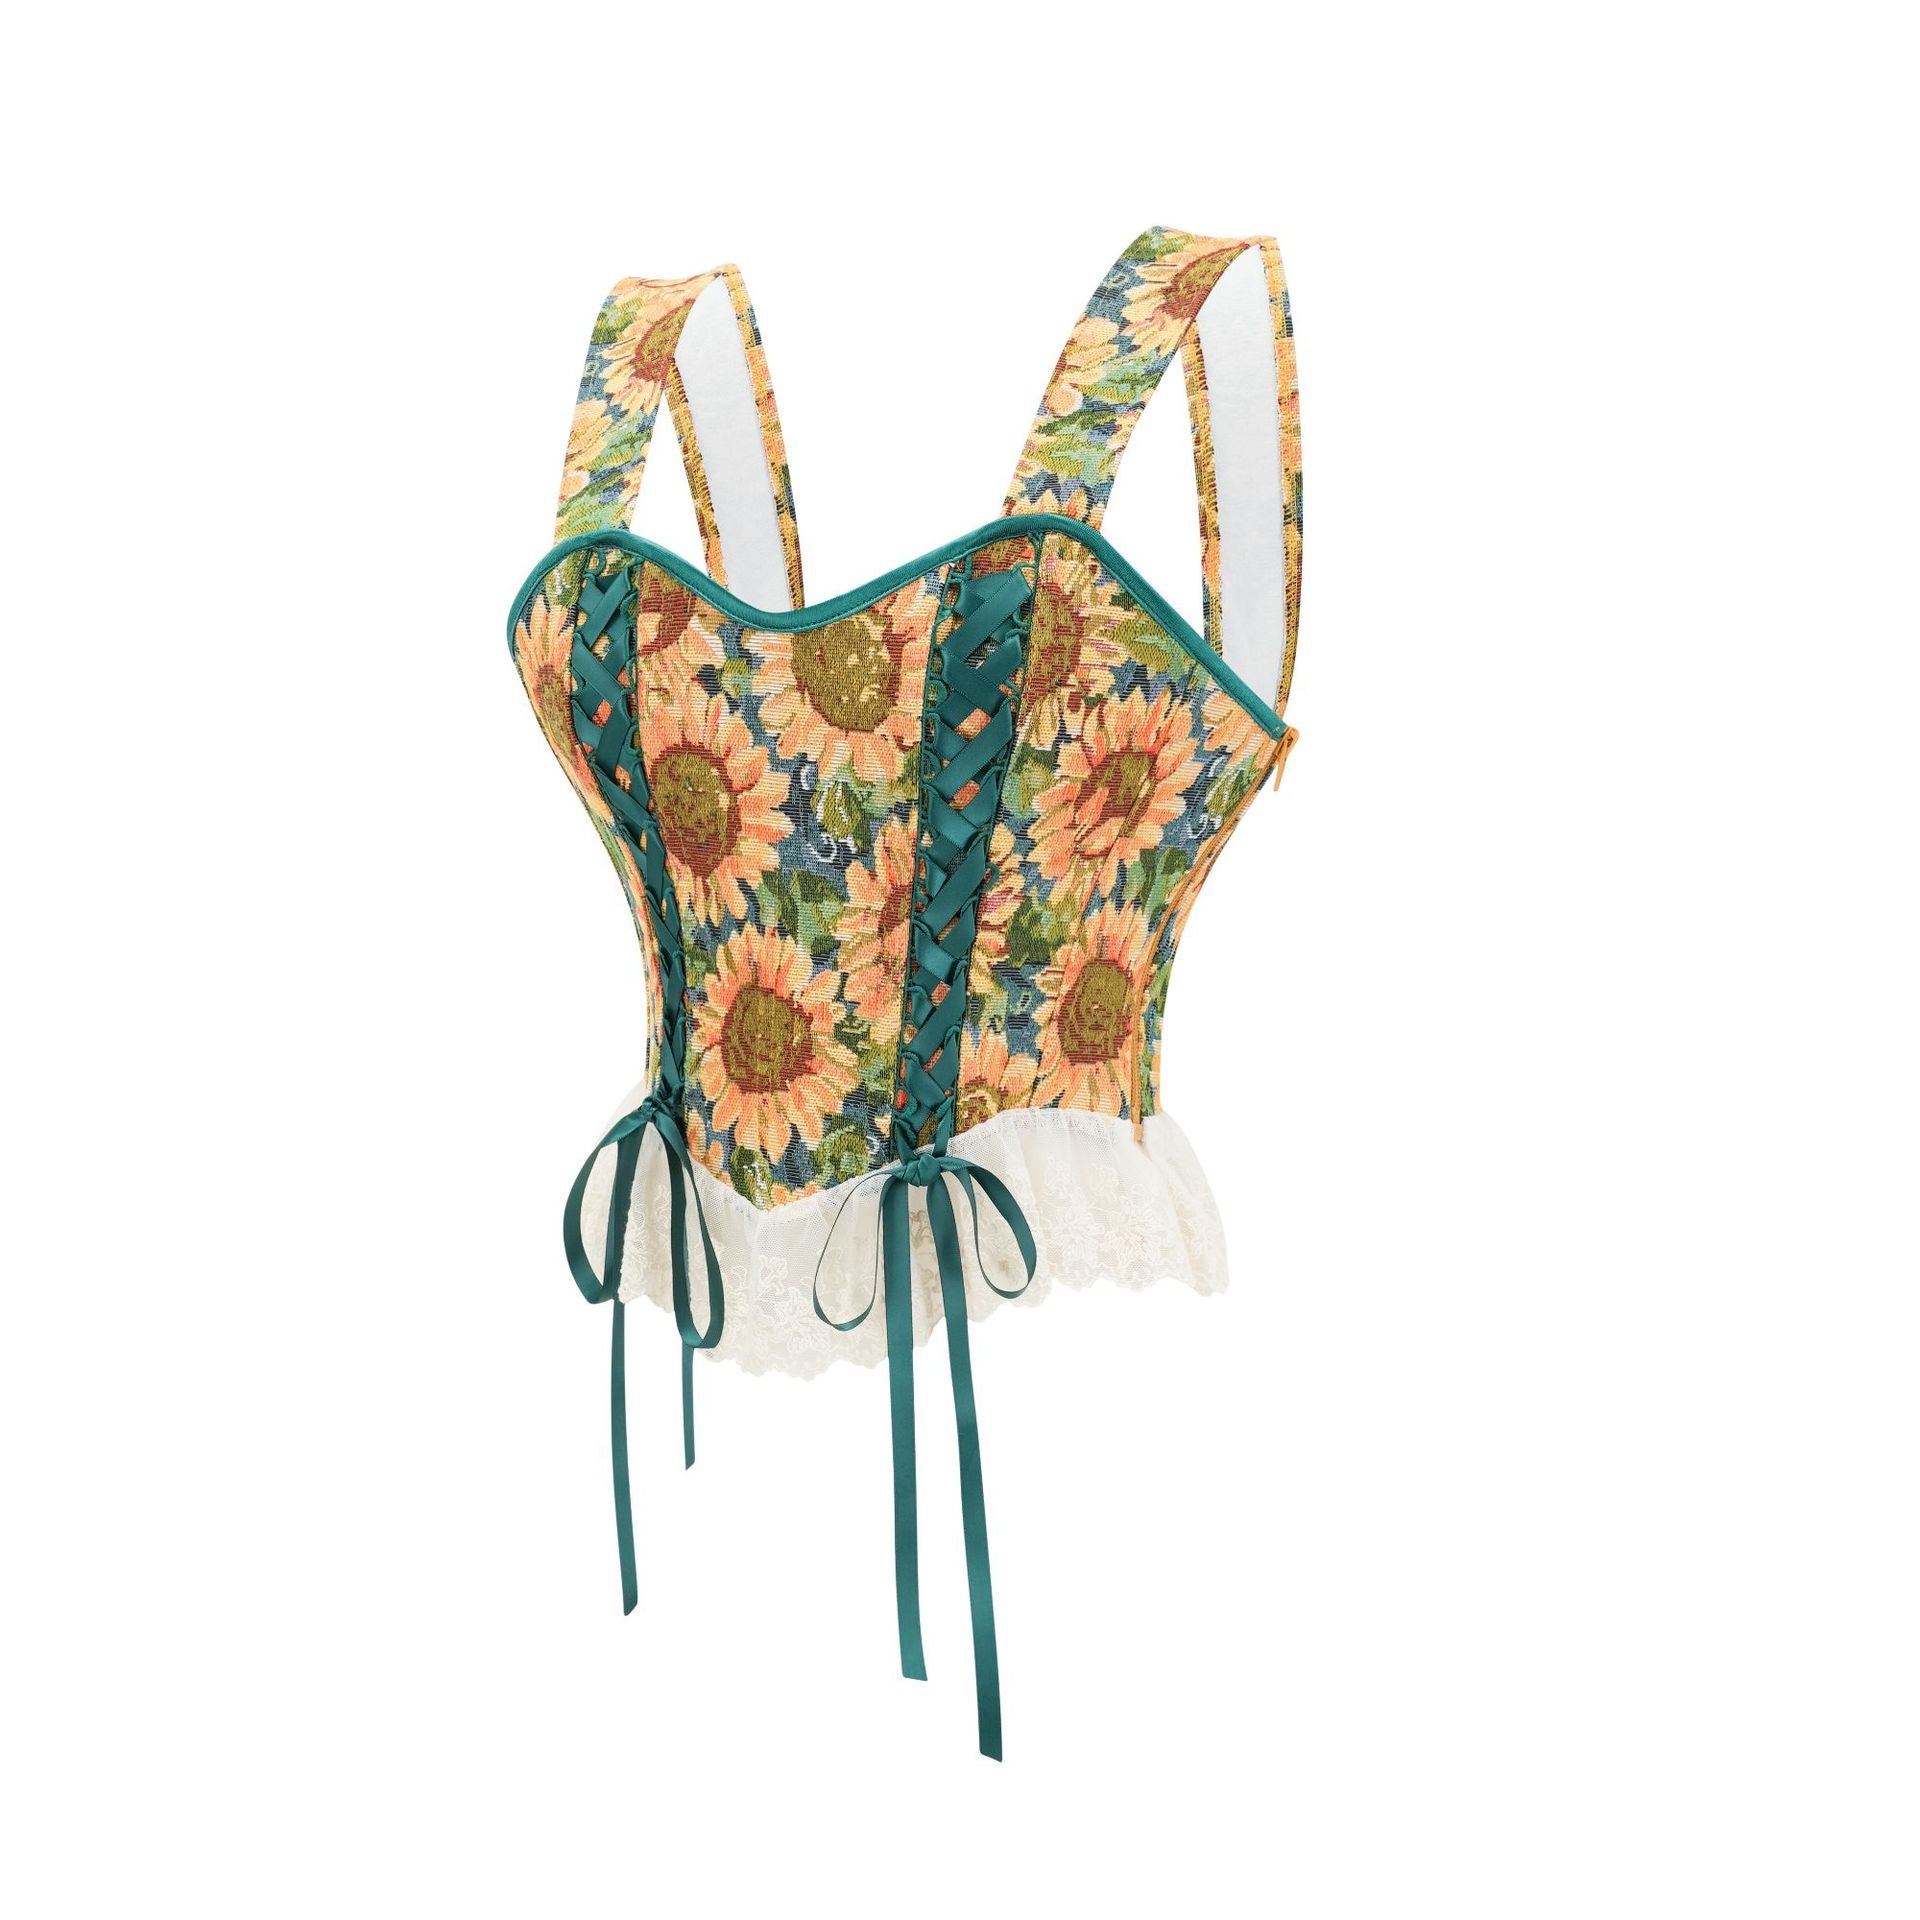 Sunflower Embroidered Shaping Bustier Corset Top with Back Tie Closure | JAMSHAPE